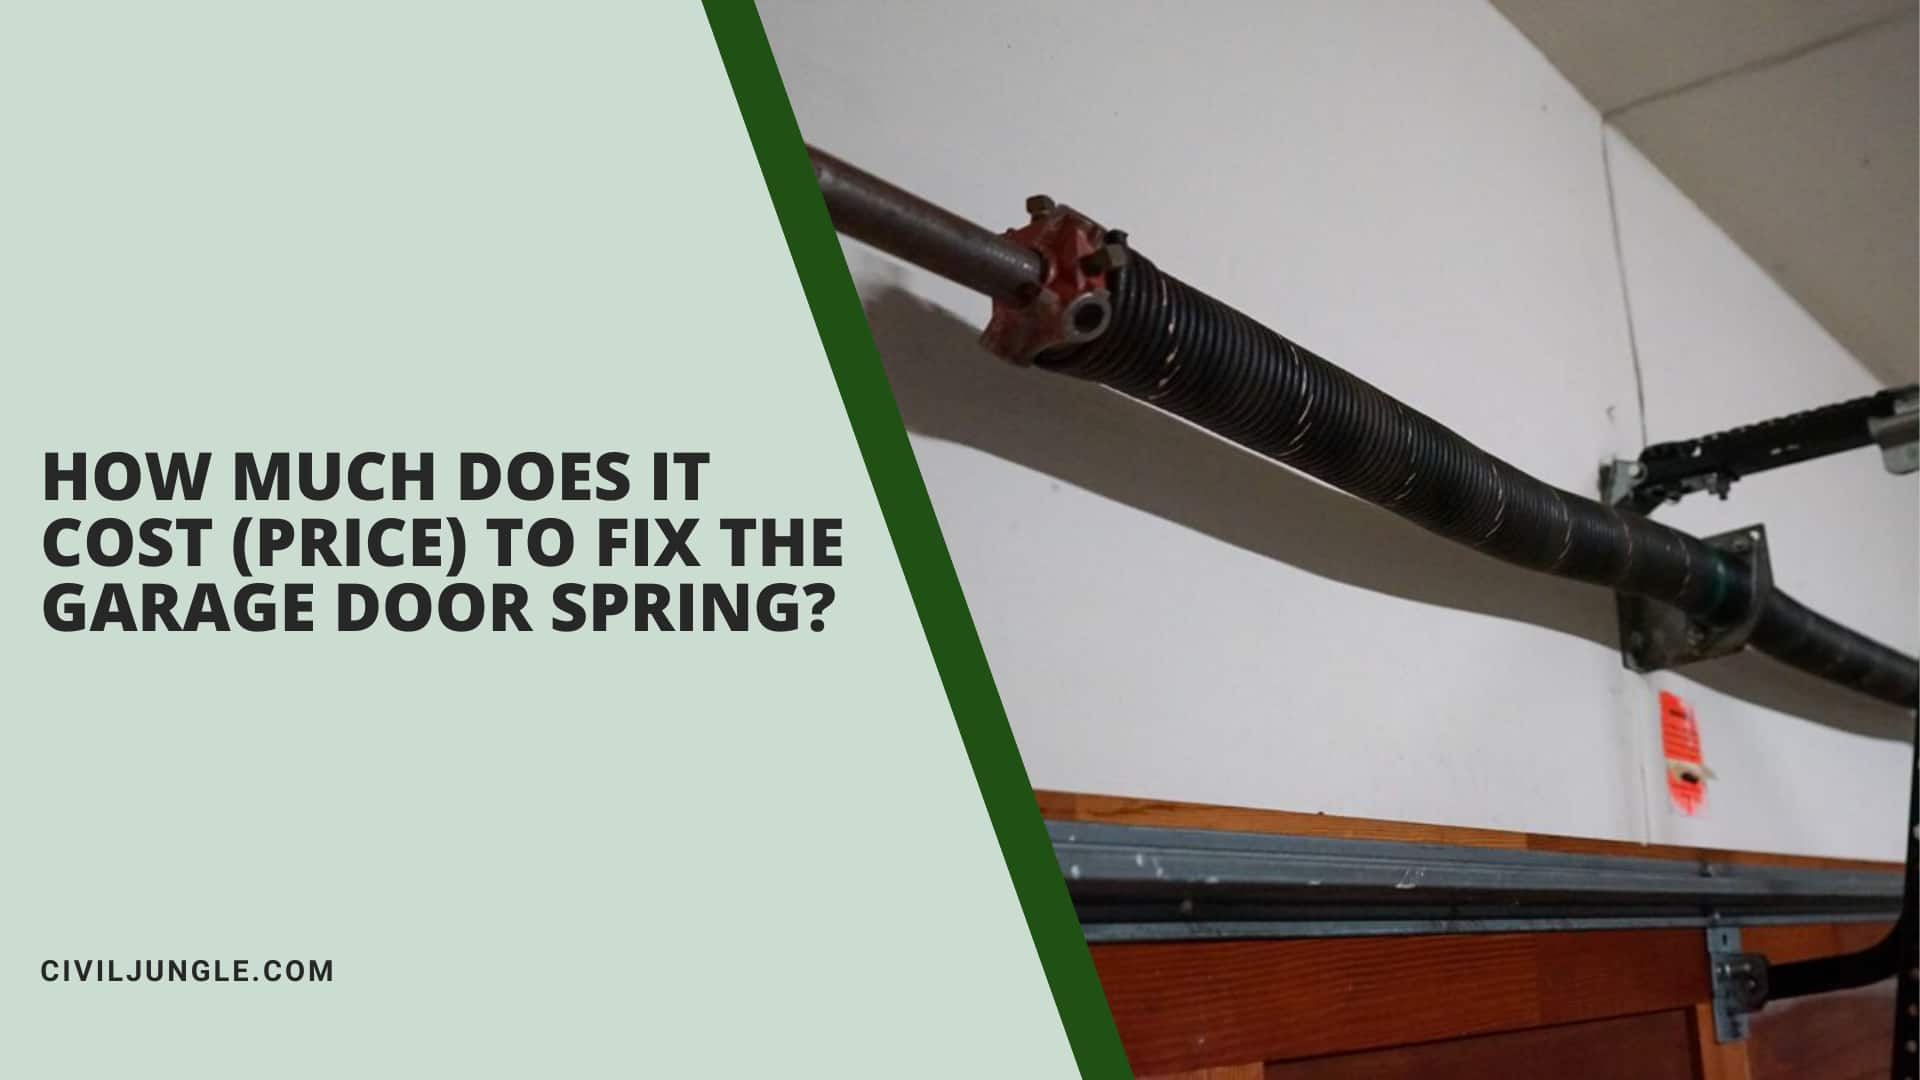 How Much Does It Cost (Price) to Fix the Garage Door Spring?